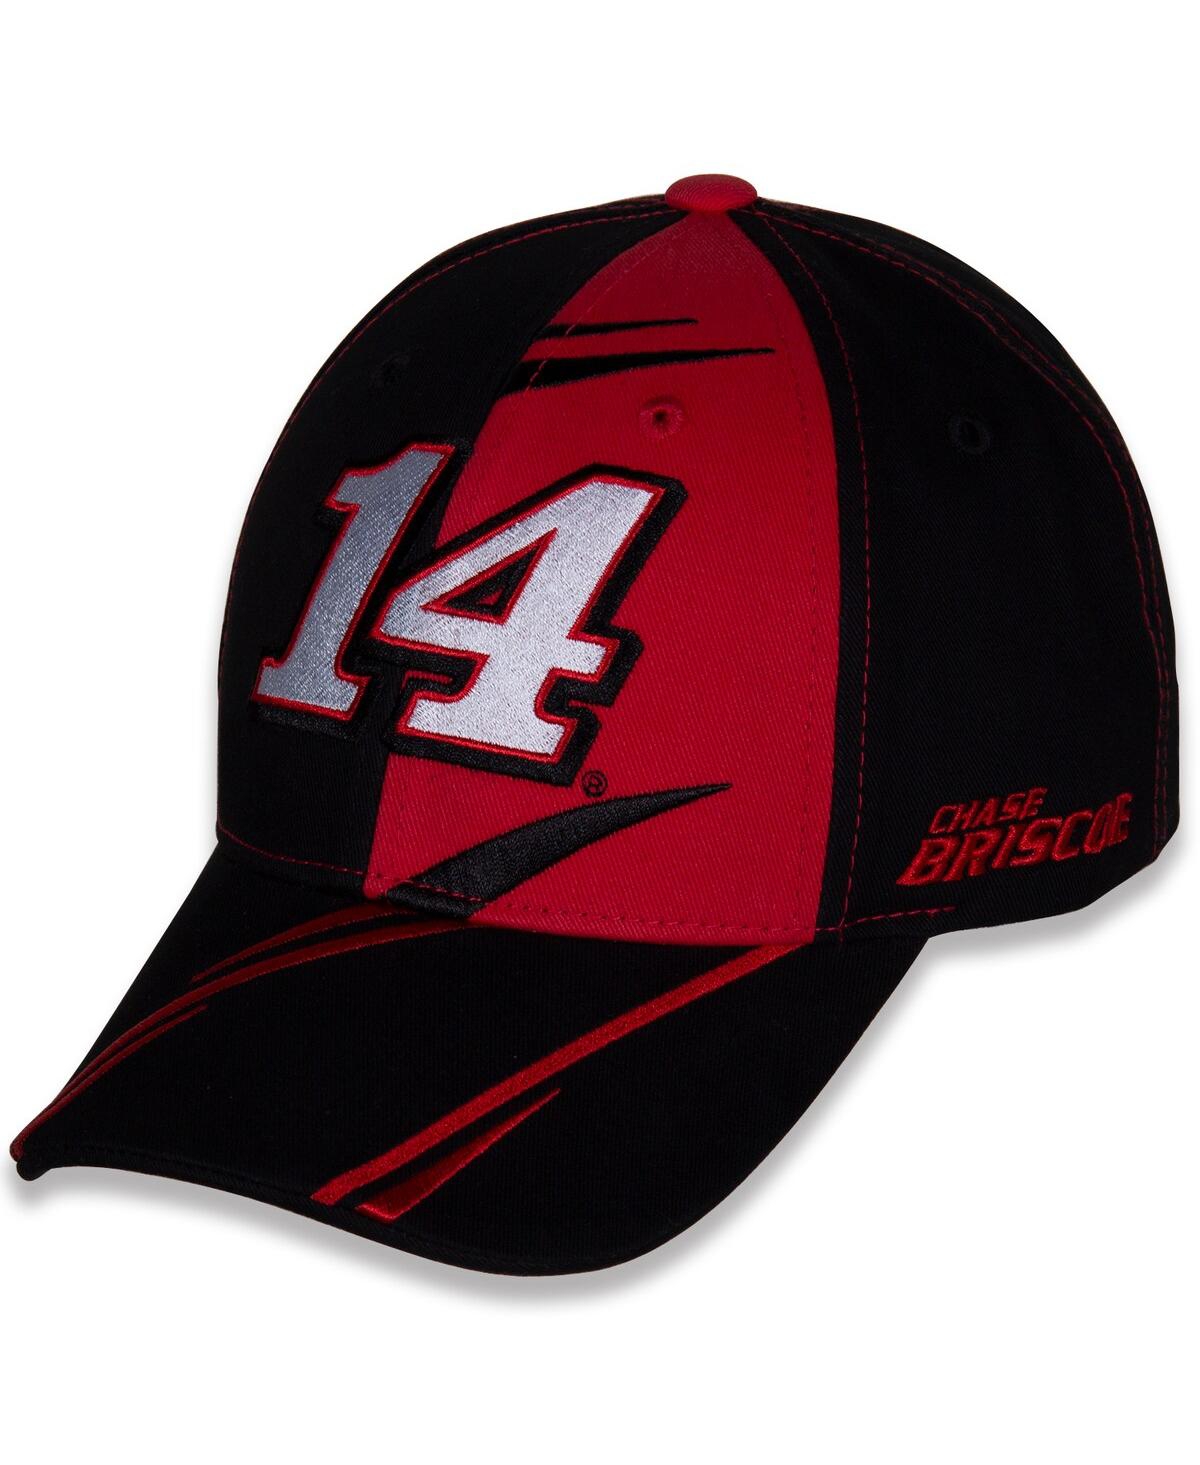 New Era Kids' Big Boys And Girls  Black, Red Chase Briscoe Element Adjustable Hat In Black,red